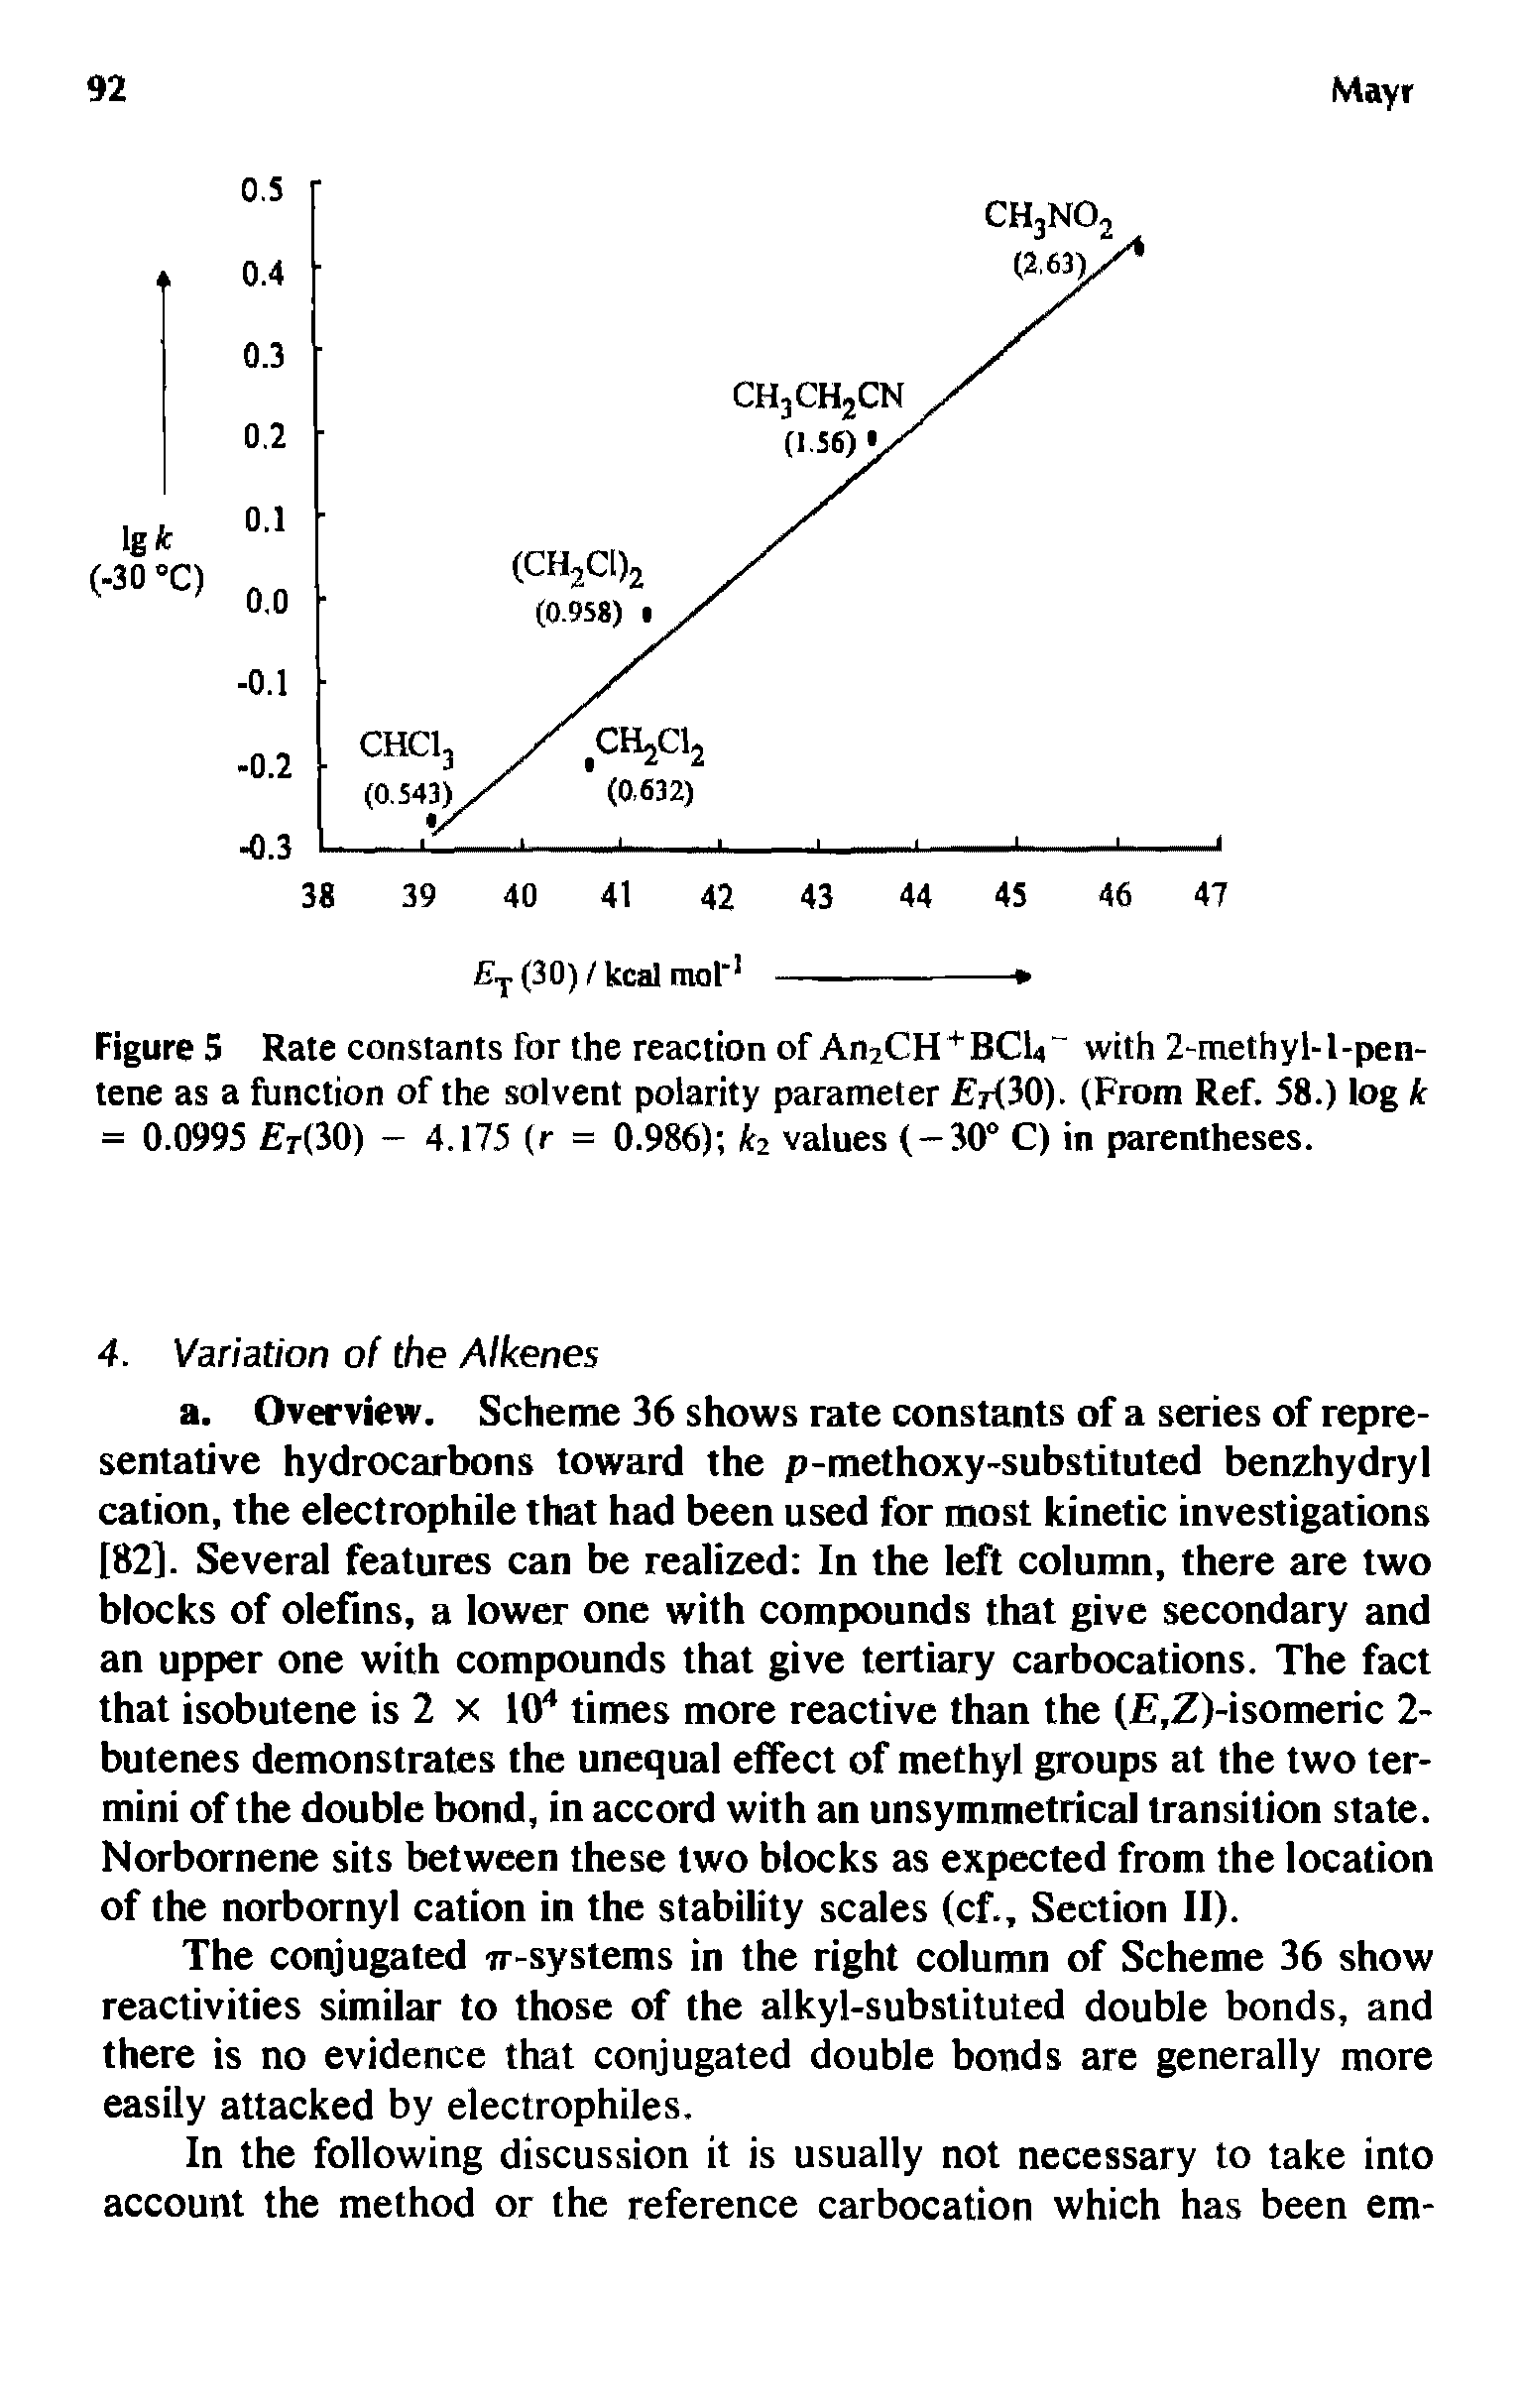 Figure 5 Rate constants for the reaction of An2CH + BCU with 2-methyl-l-pen-tene as a function of the solvent polarity parameter EA30). (From Ref. 58.) log k = 0.0995 Et(30) - 4.175 (r = 0.986) ki values ( — 30° C) in parentheses.